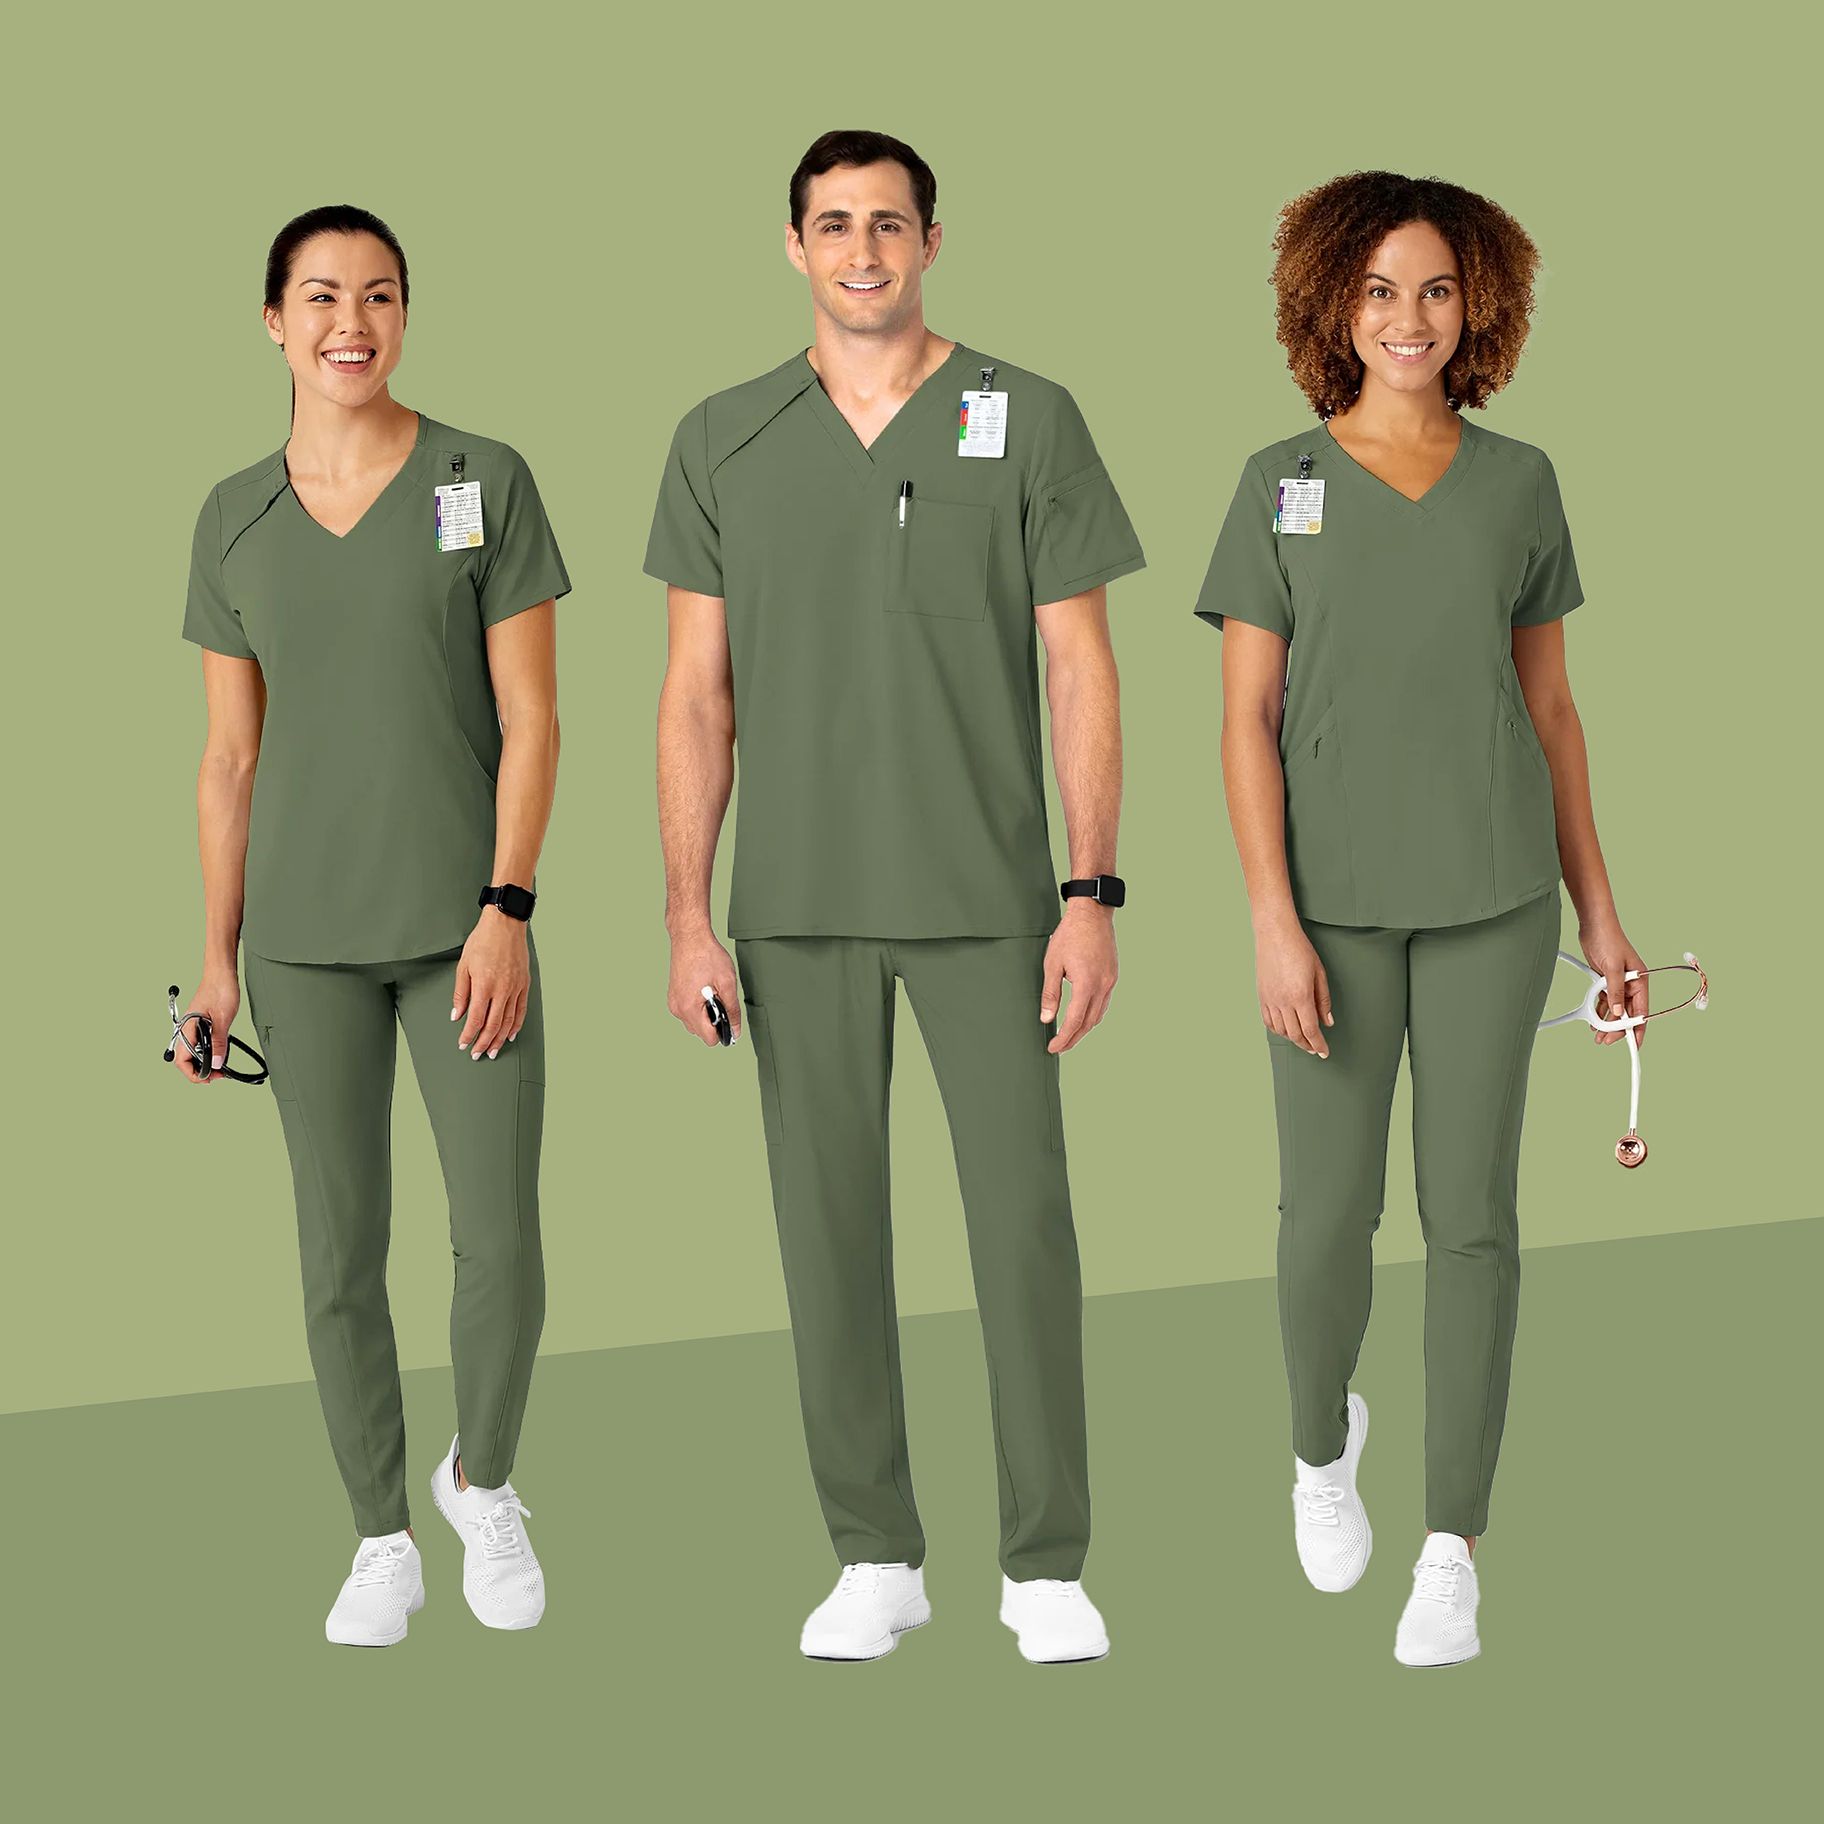 Wink, formerly known as WonderWink, is redefining medical attire with its recent rebrand.